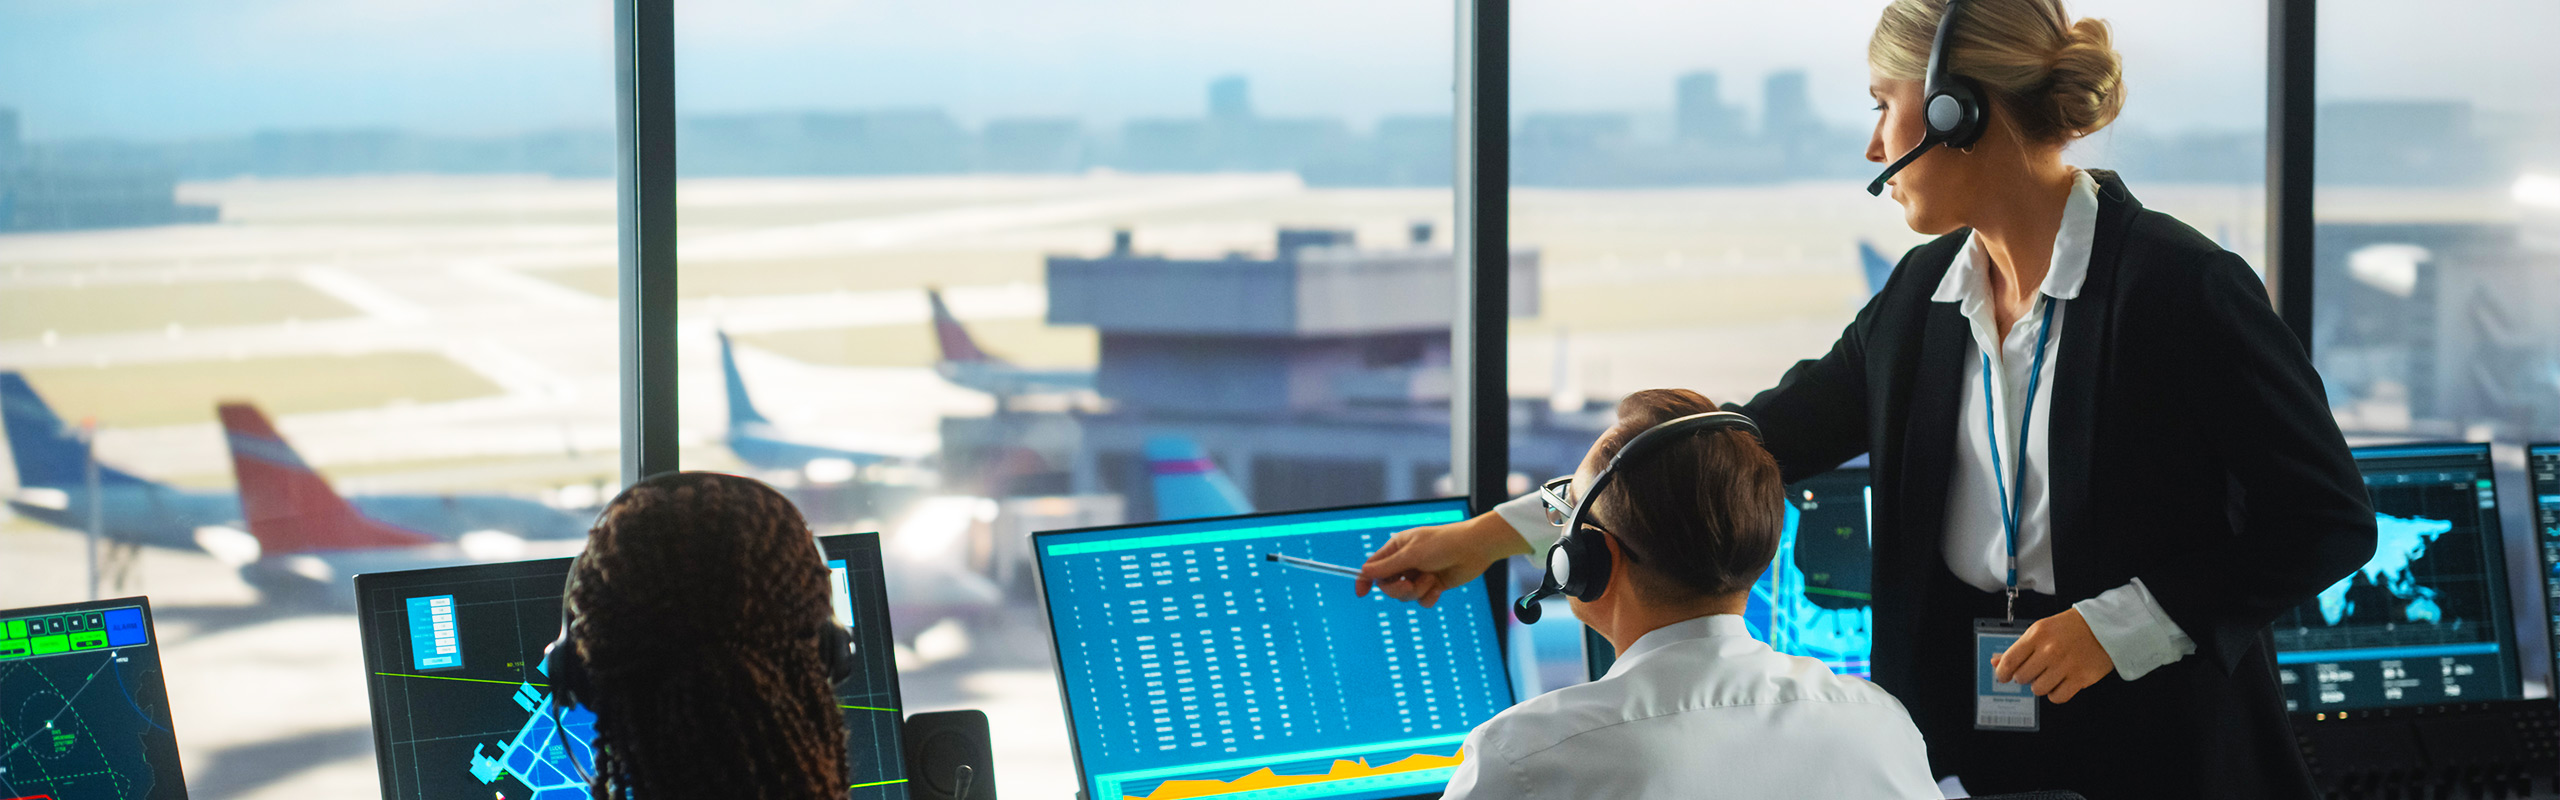 Streamlining Airport Operations with Business Aware AIOPs Command Center